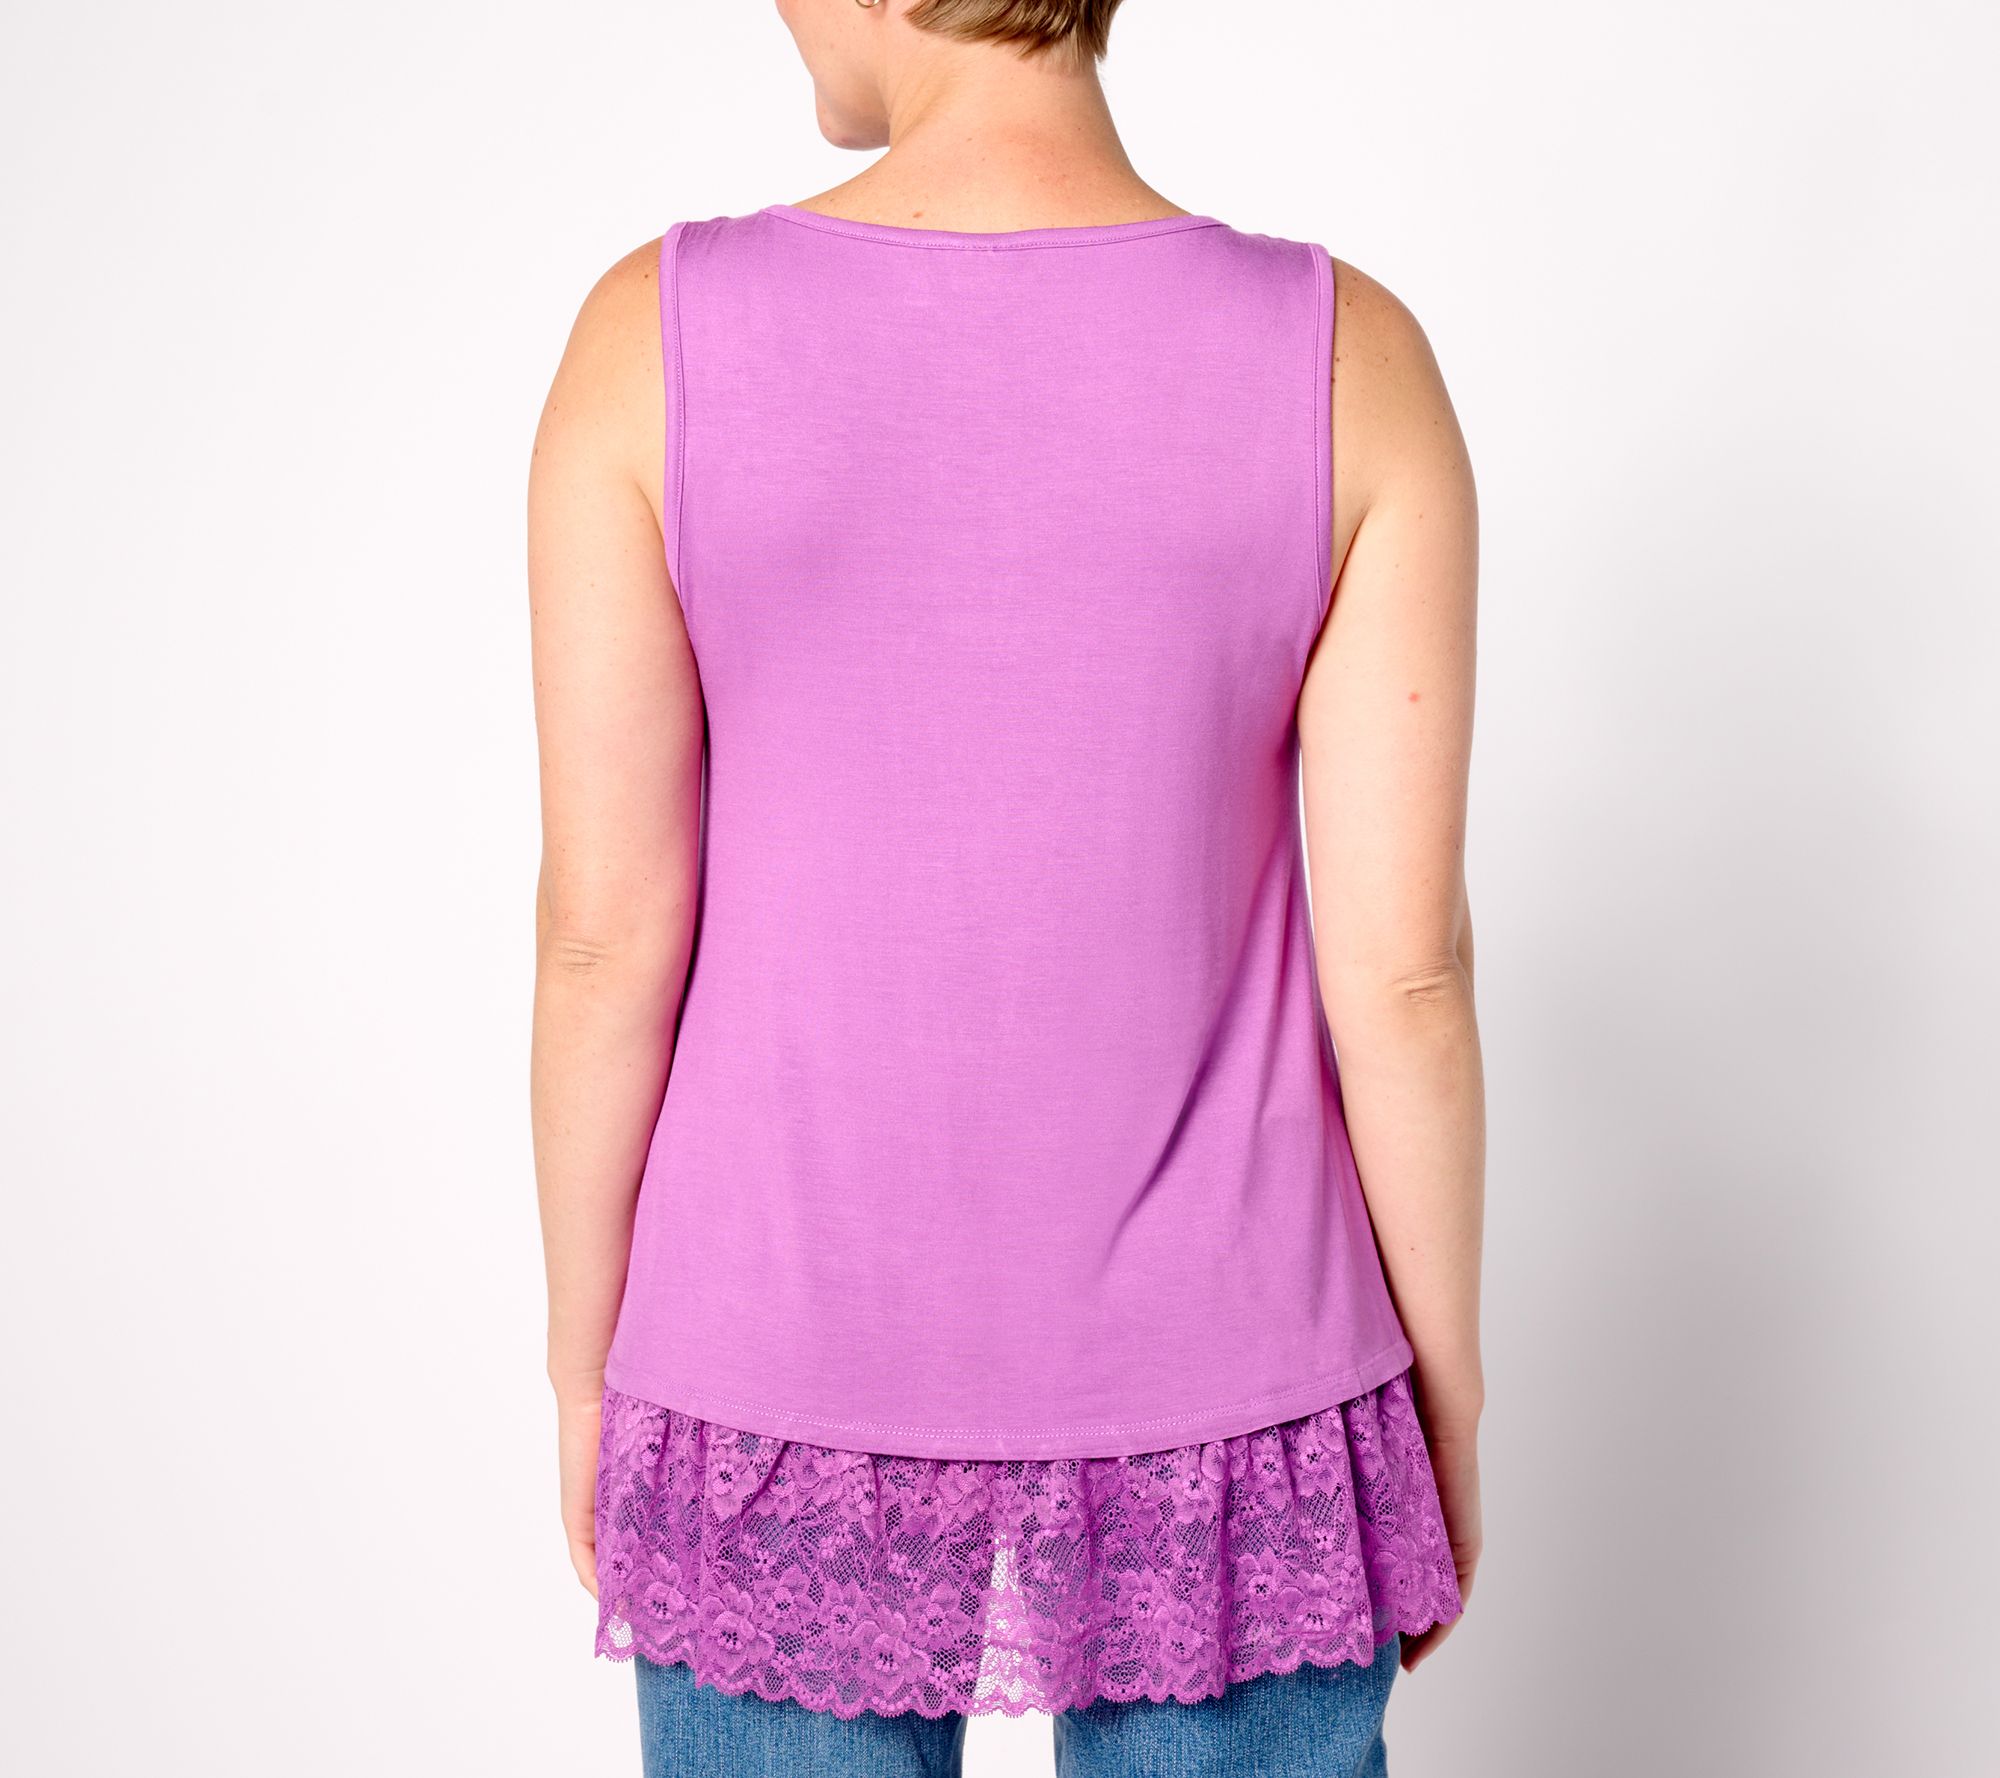 LOGO Layers by Lori Goldstein Knit Tank Top with Lace Hem